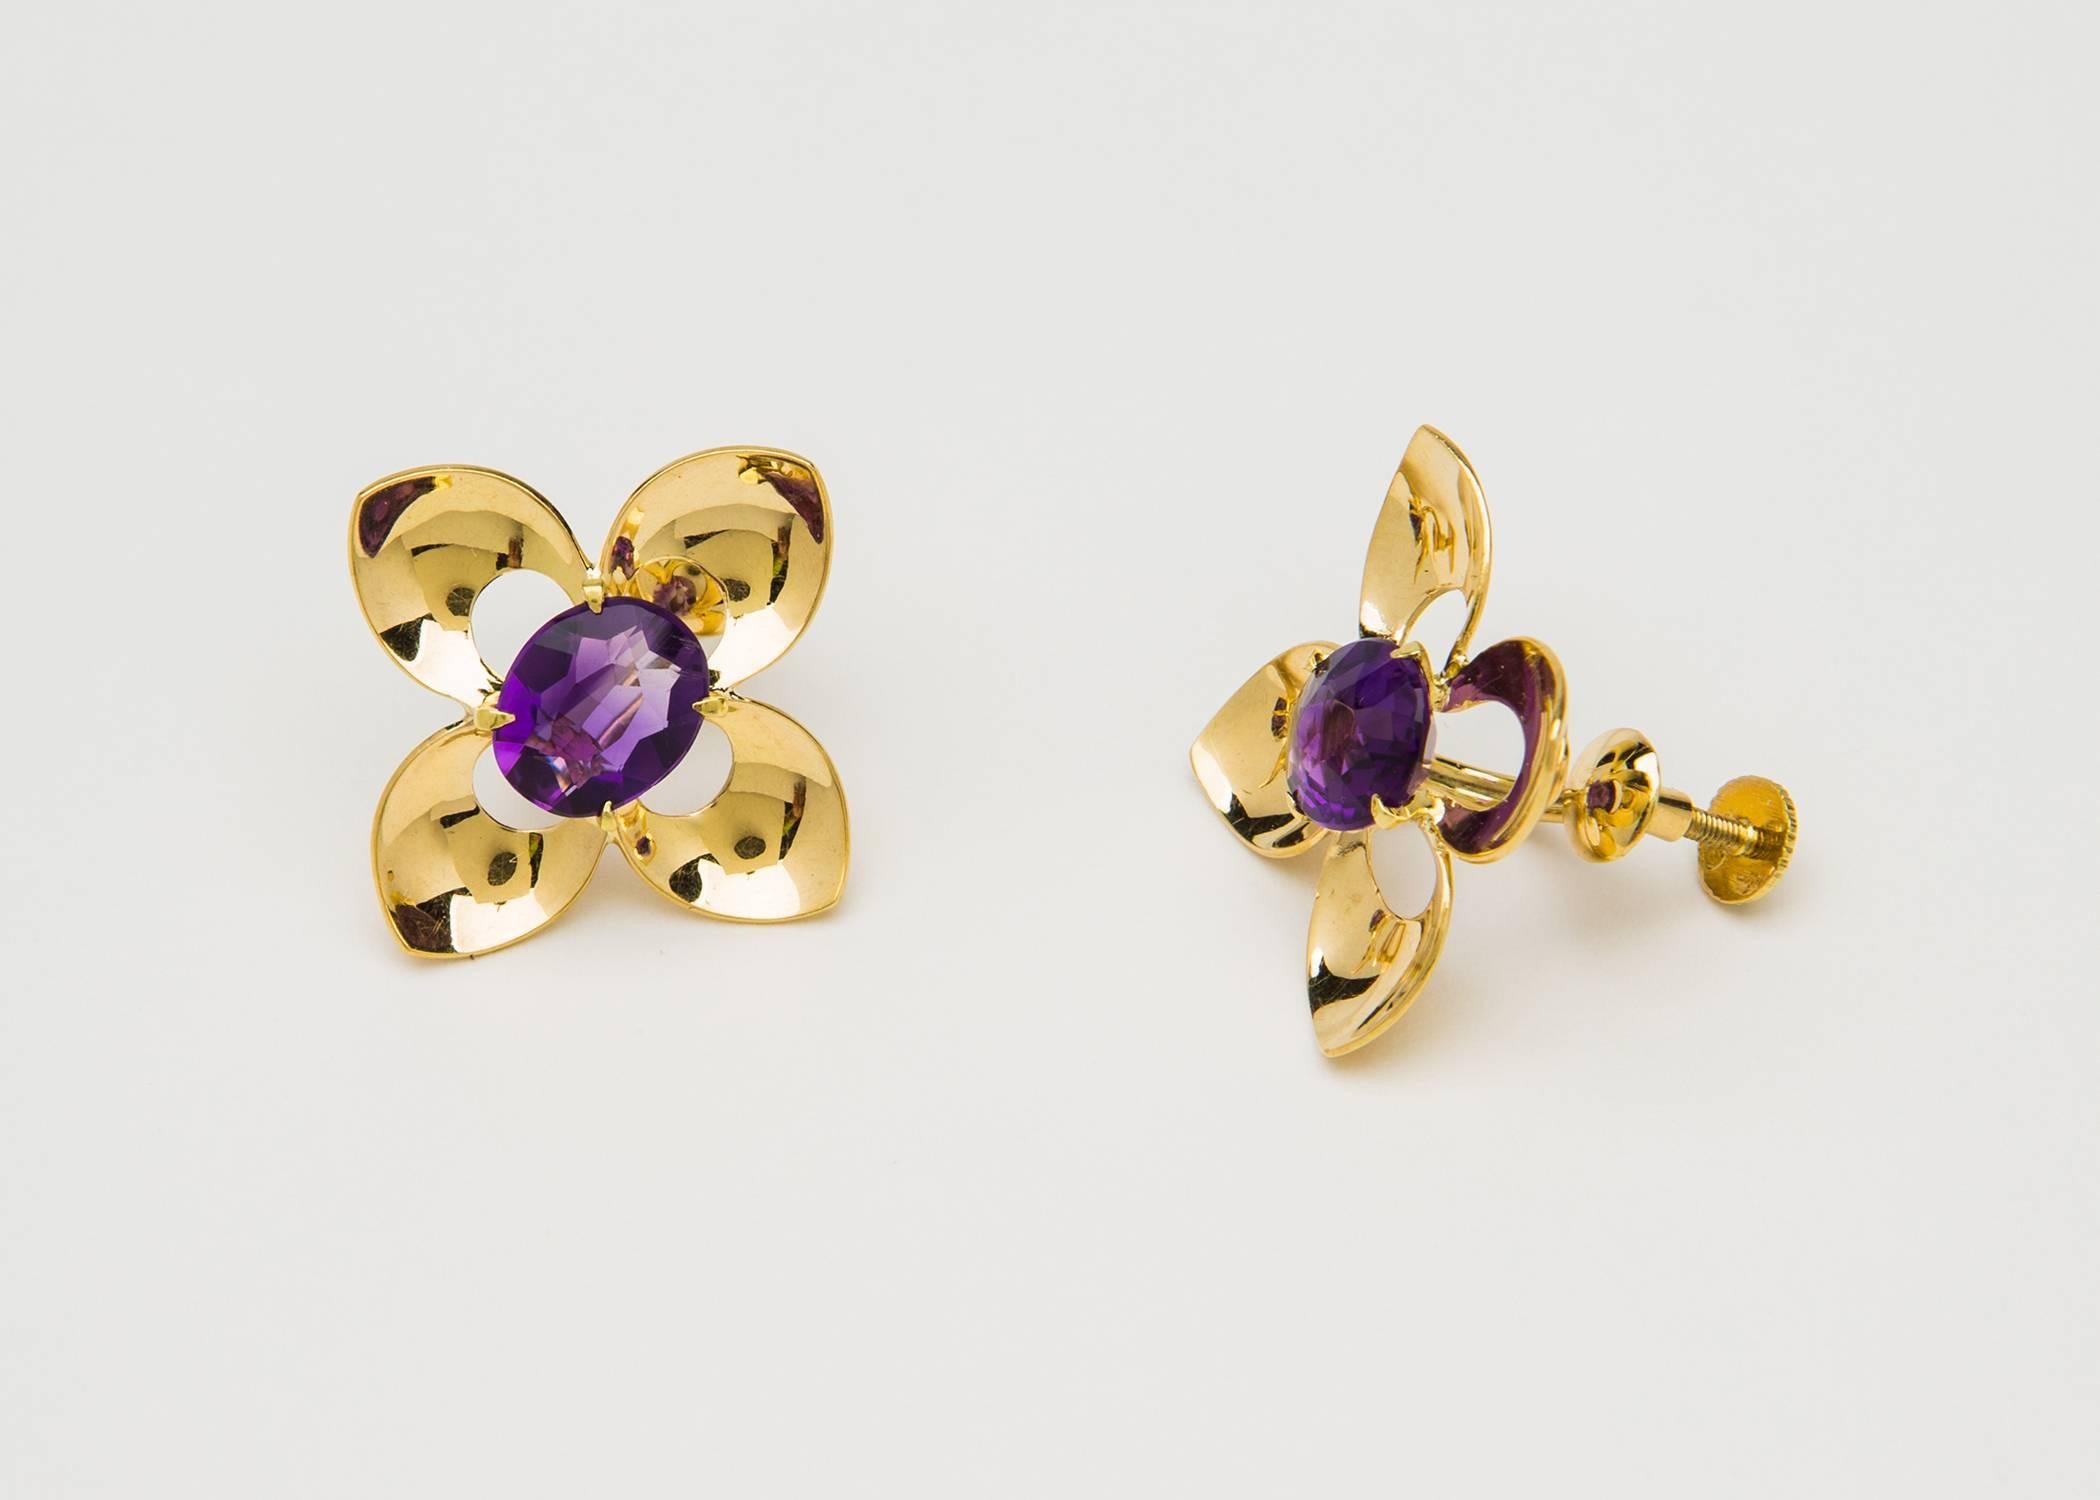 Pure Retro style is found in this pair of Tiffany & Co. earrings centering deep purple amethysts.  1 1/8 inches in scale